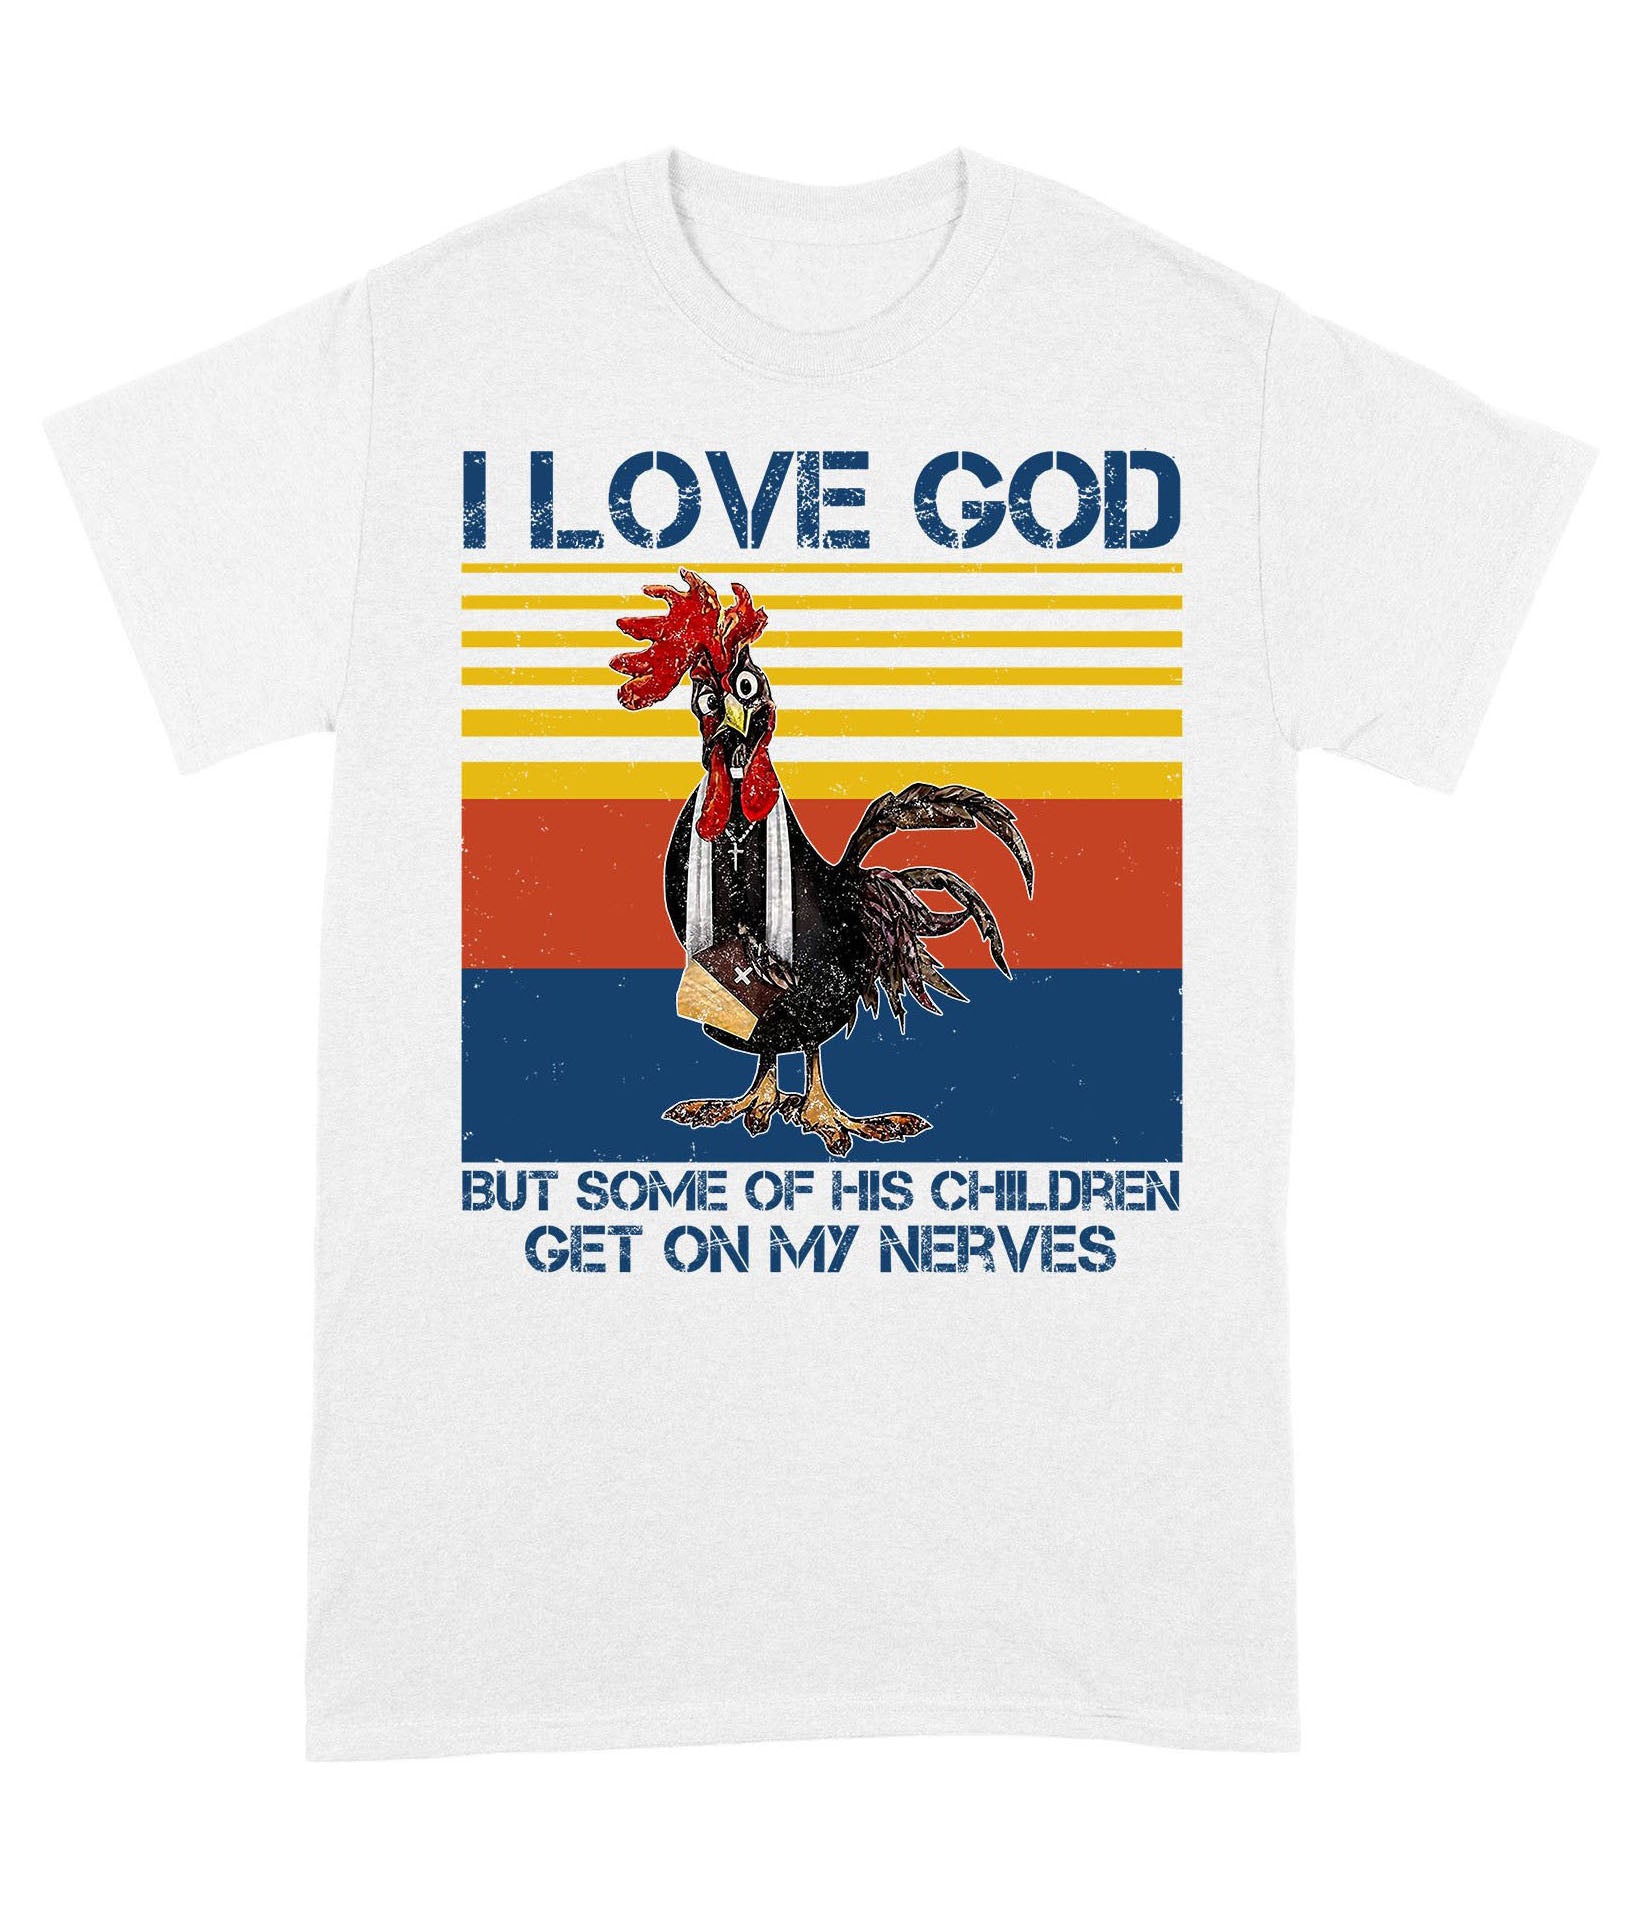 I Love God But Some of His Children Get On My Nerves - Standard T-Shirt